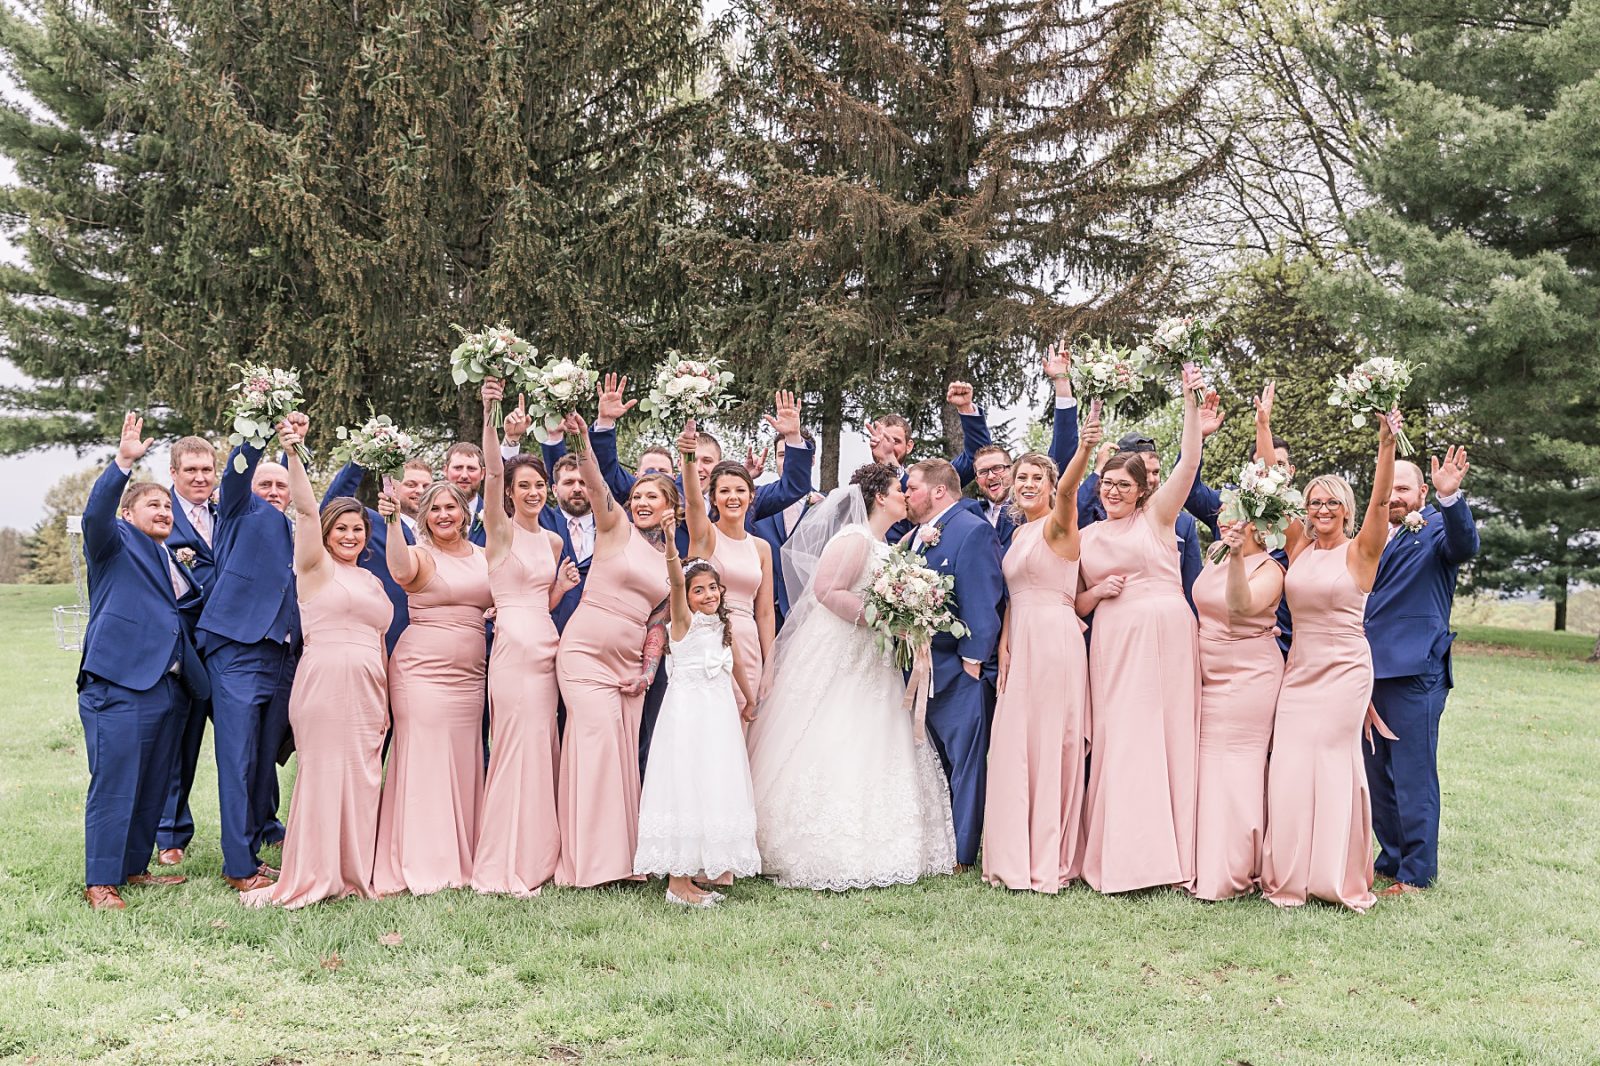 Wedding photography by Diana Gramlich, Blush and Navy Blue wedding party cheering while bride and groom kissing